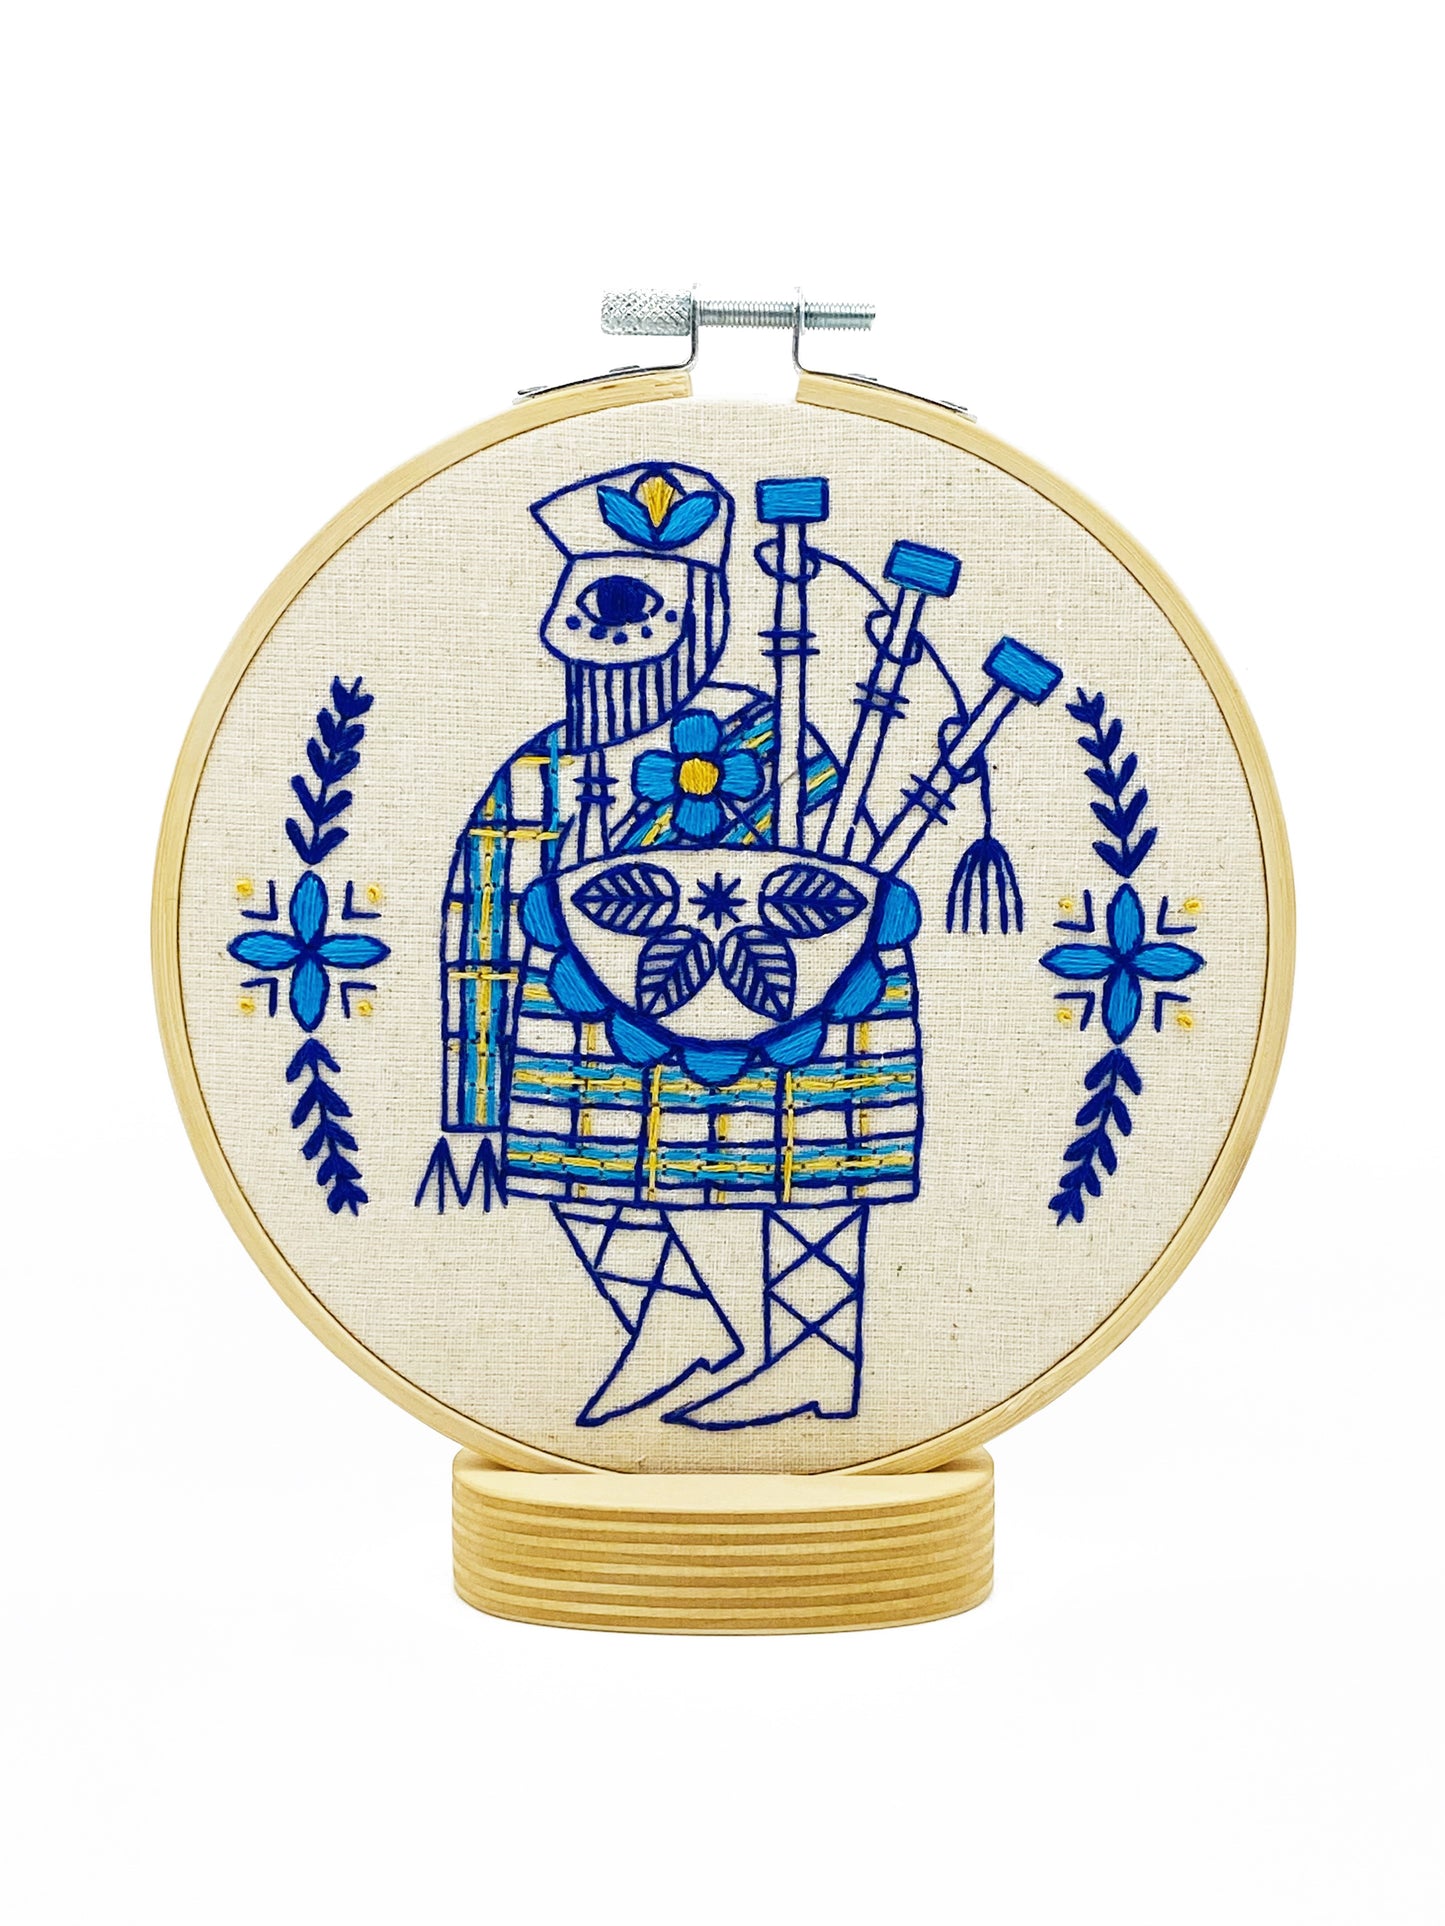 NEW! Bagpiper Piping Complete Embroidery Kit